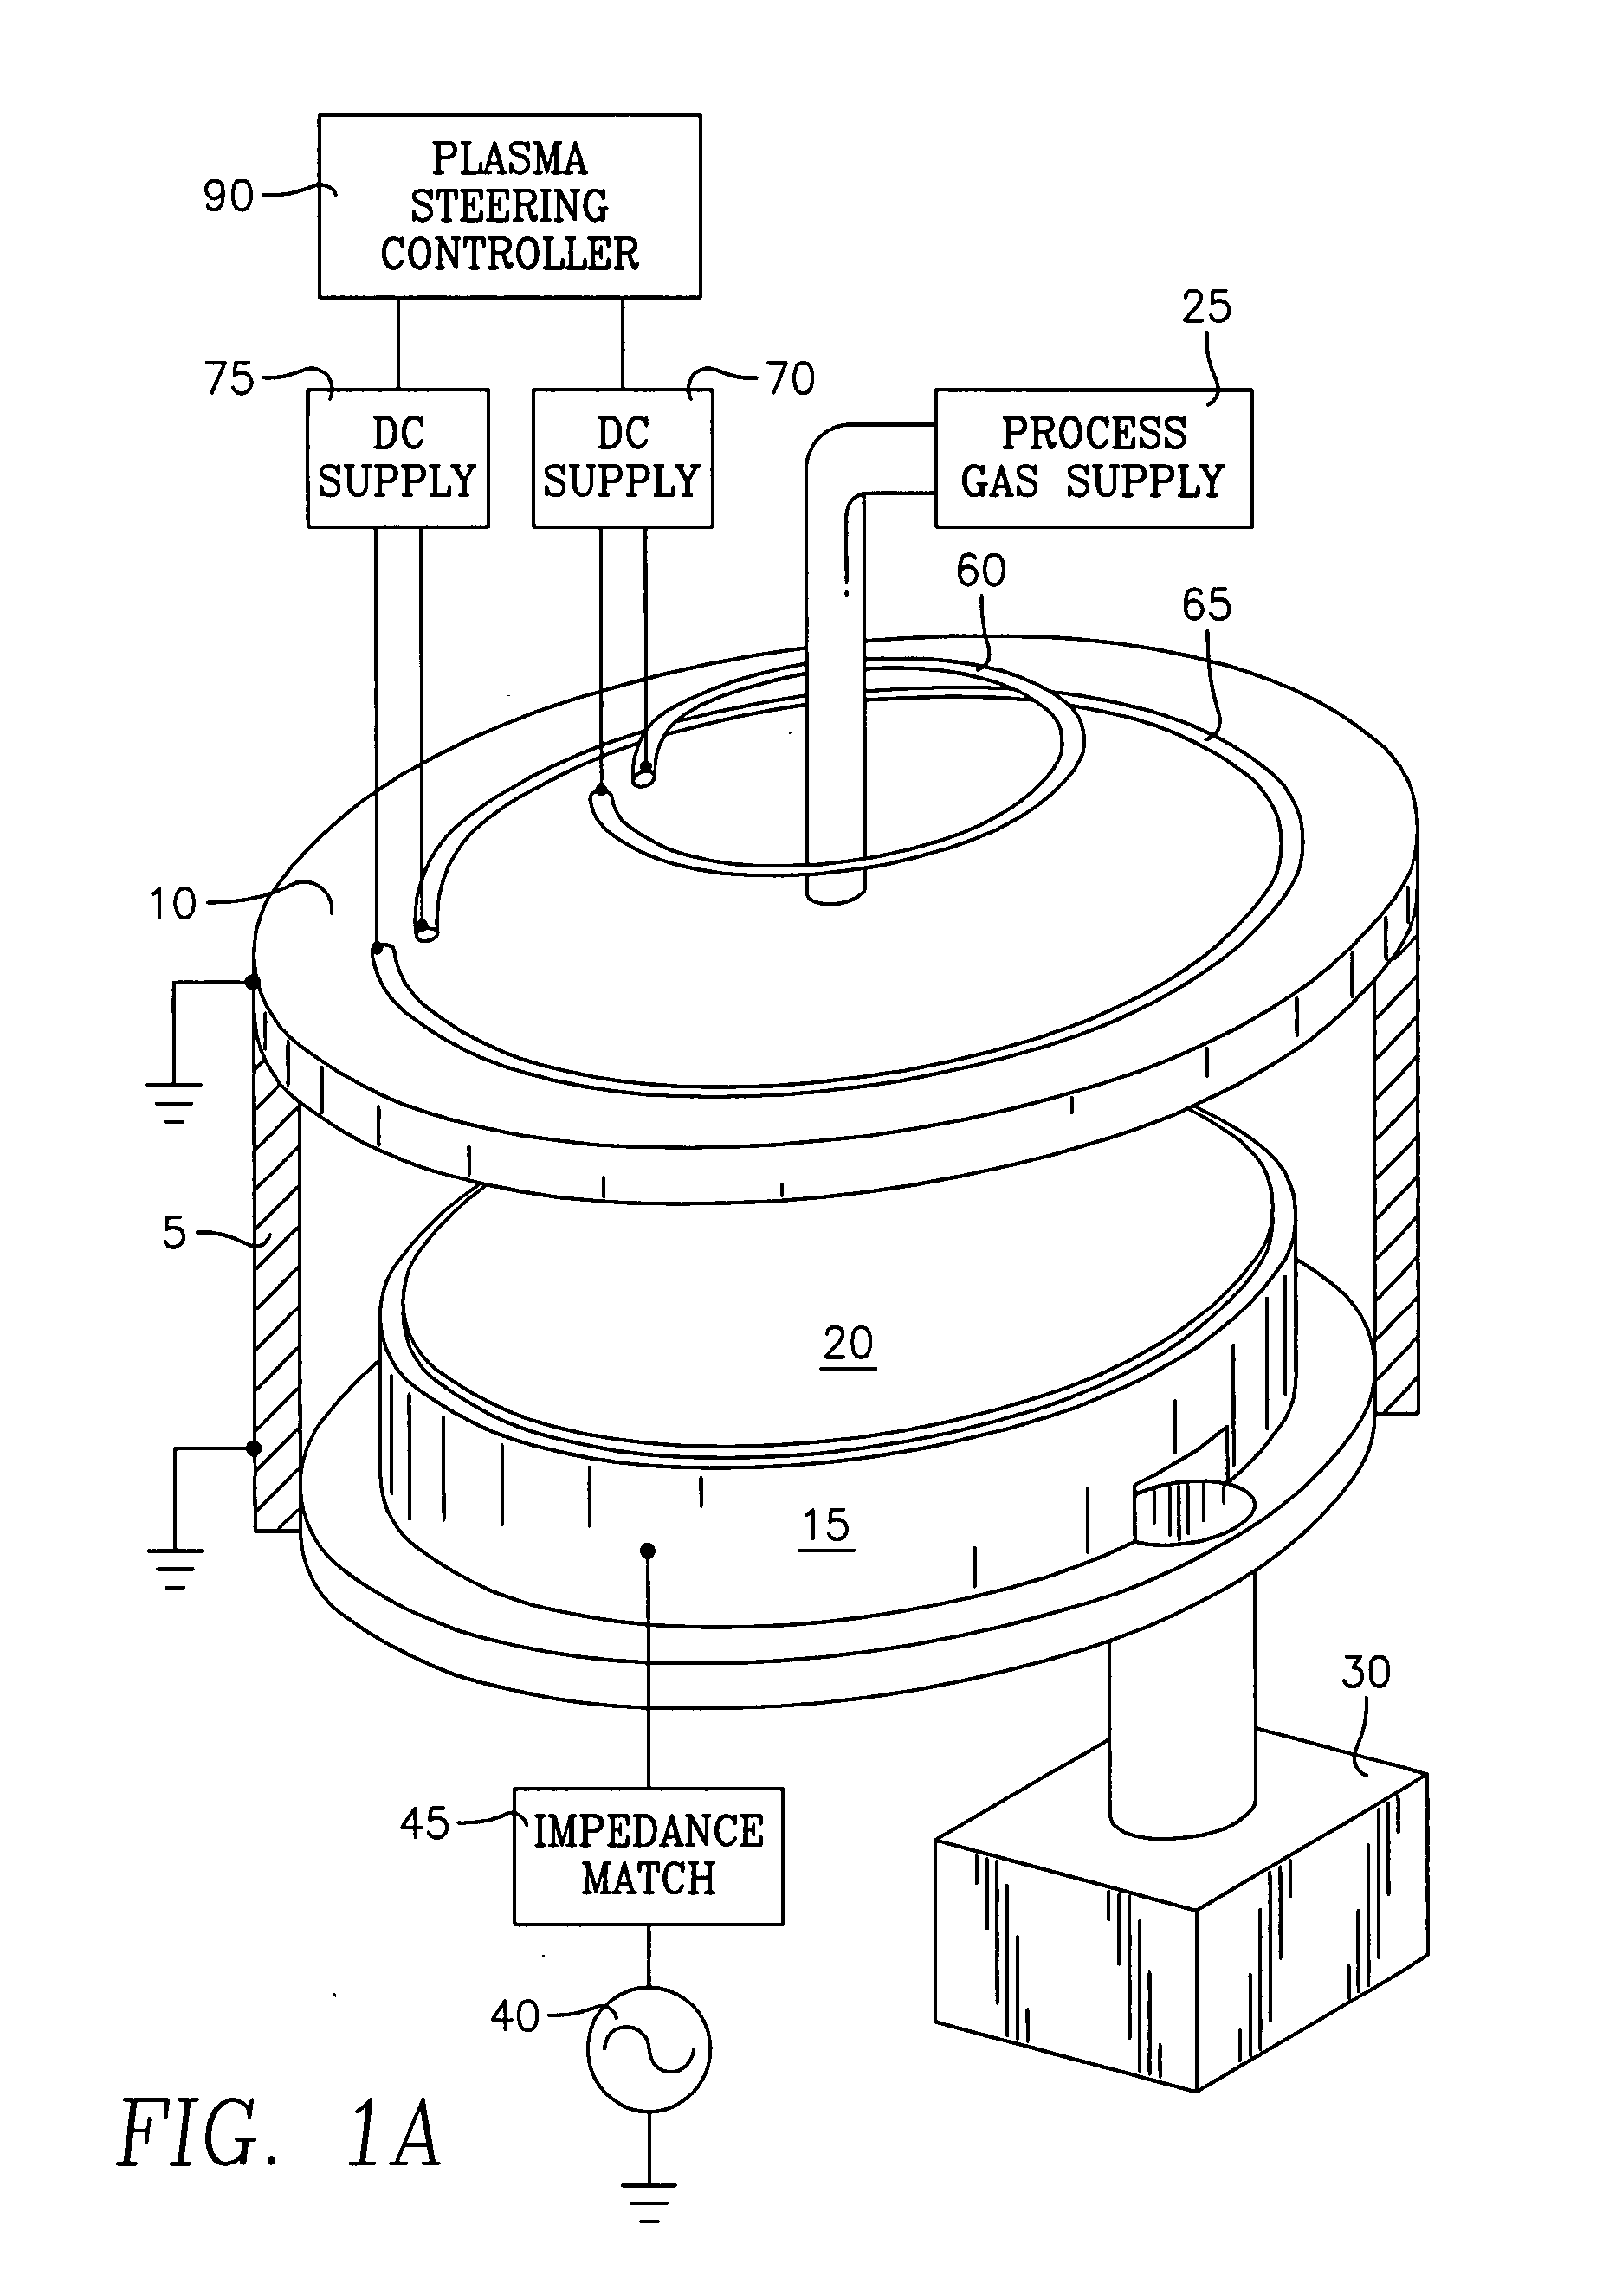 Capacitively coupled plasma reactor with magnetic plasma control